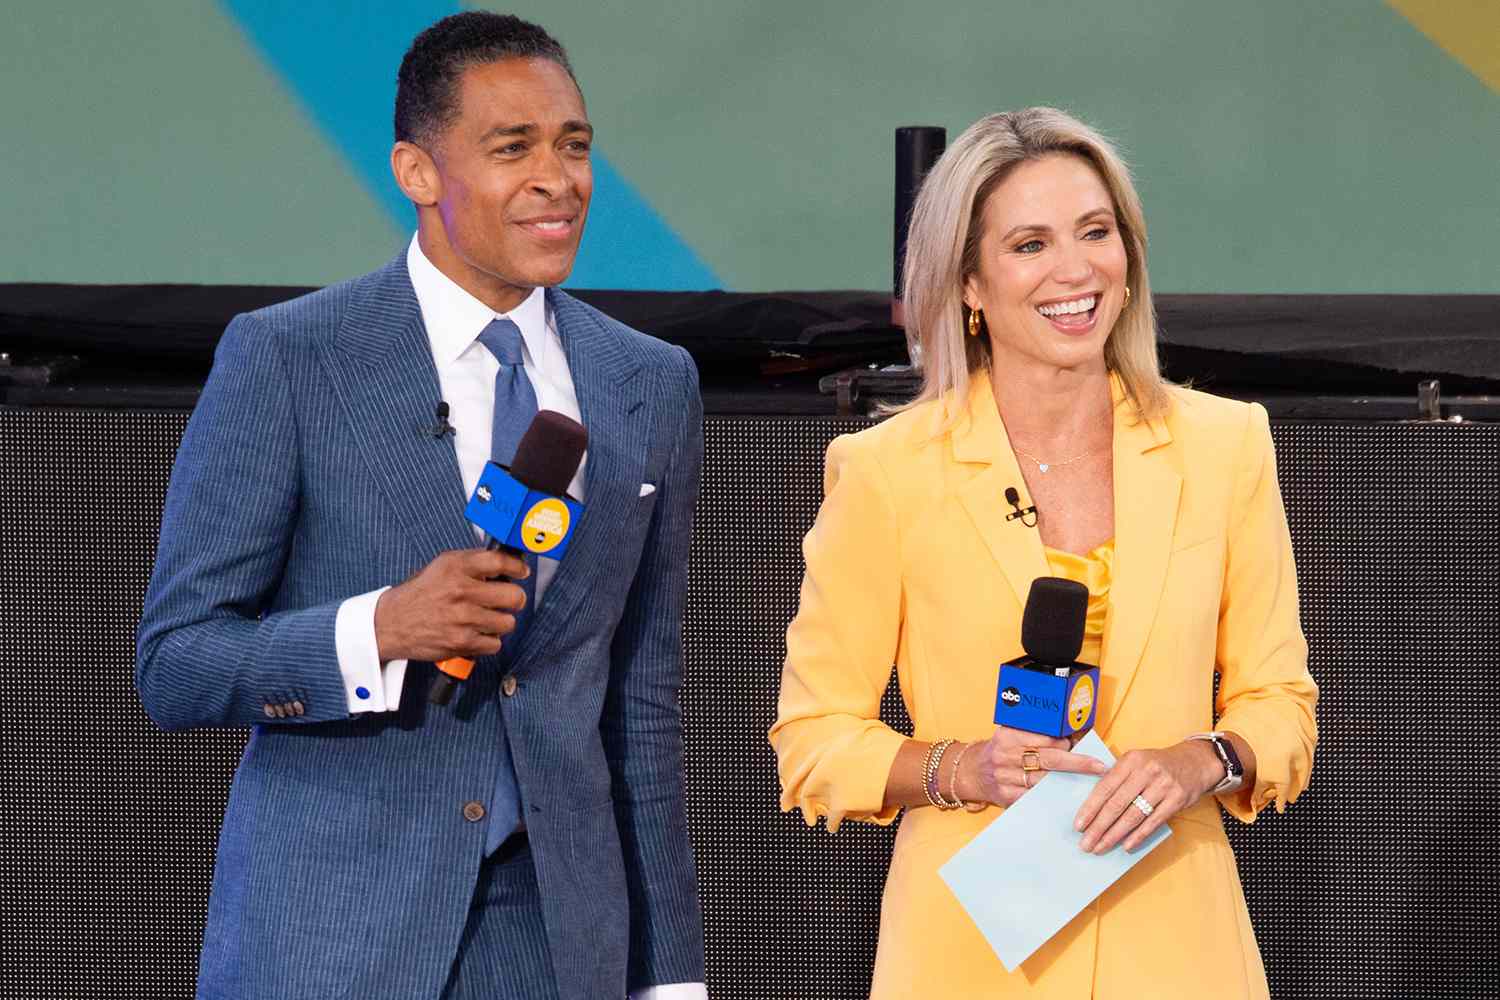 Who Will Be The Next Female Co-Anchor Of "Good Morning America?"